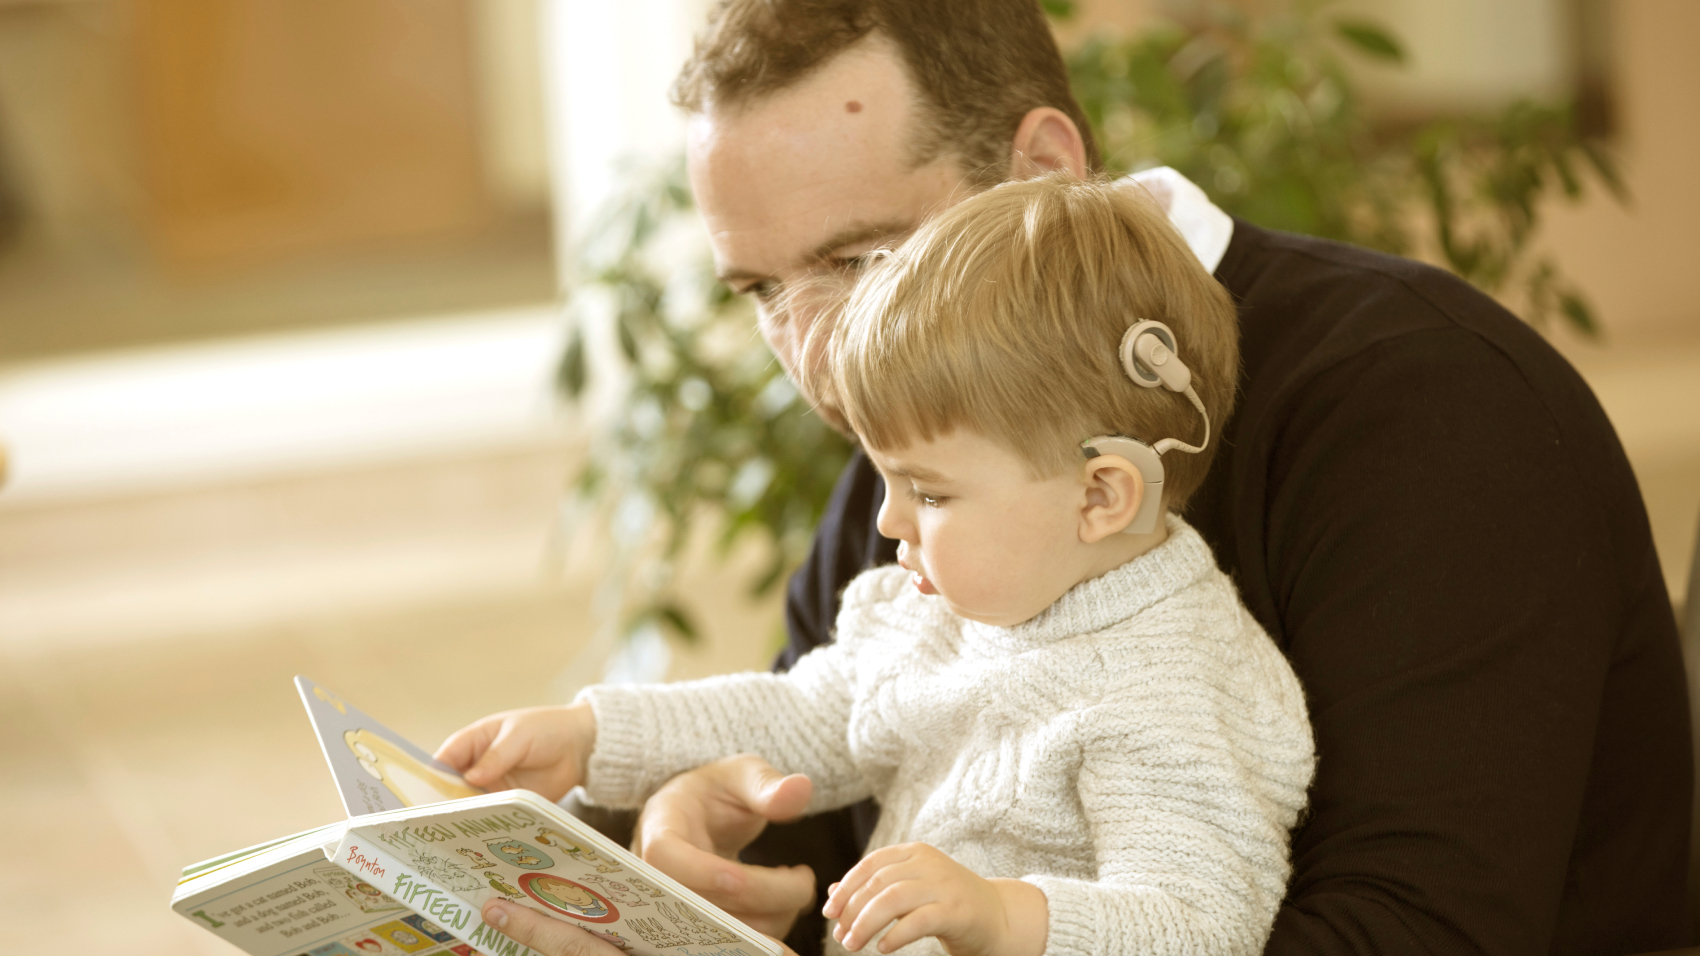 A young child sits in the lap of an adult while both are looking at a picture book.